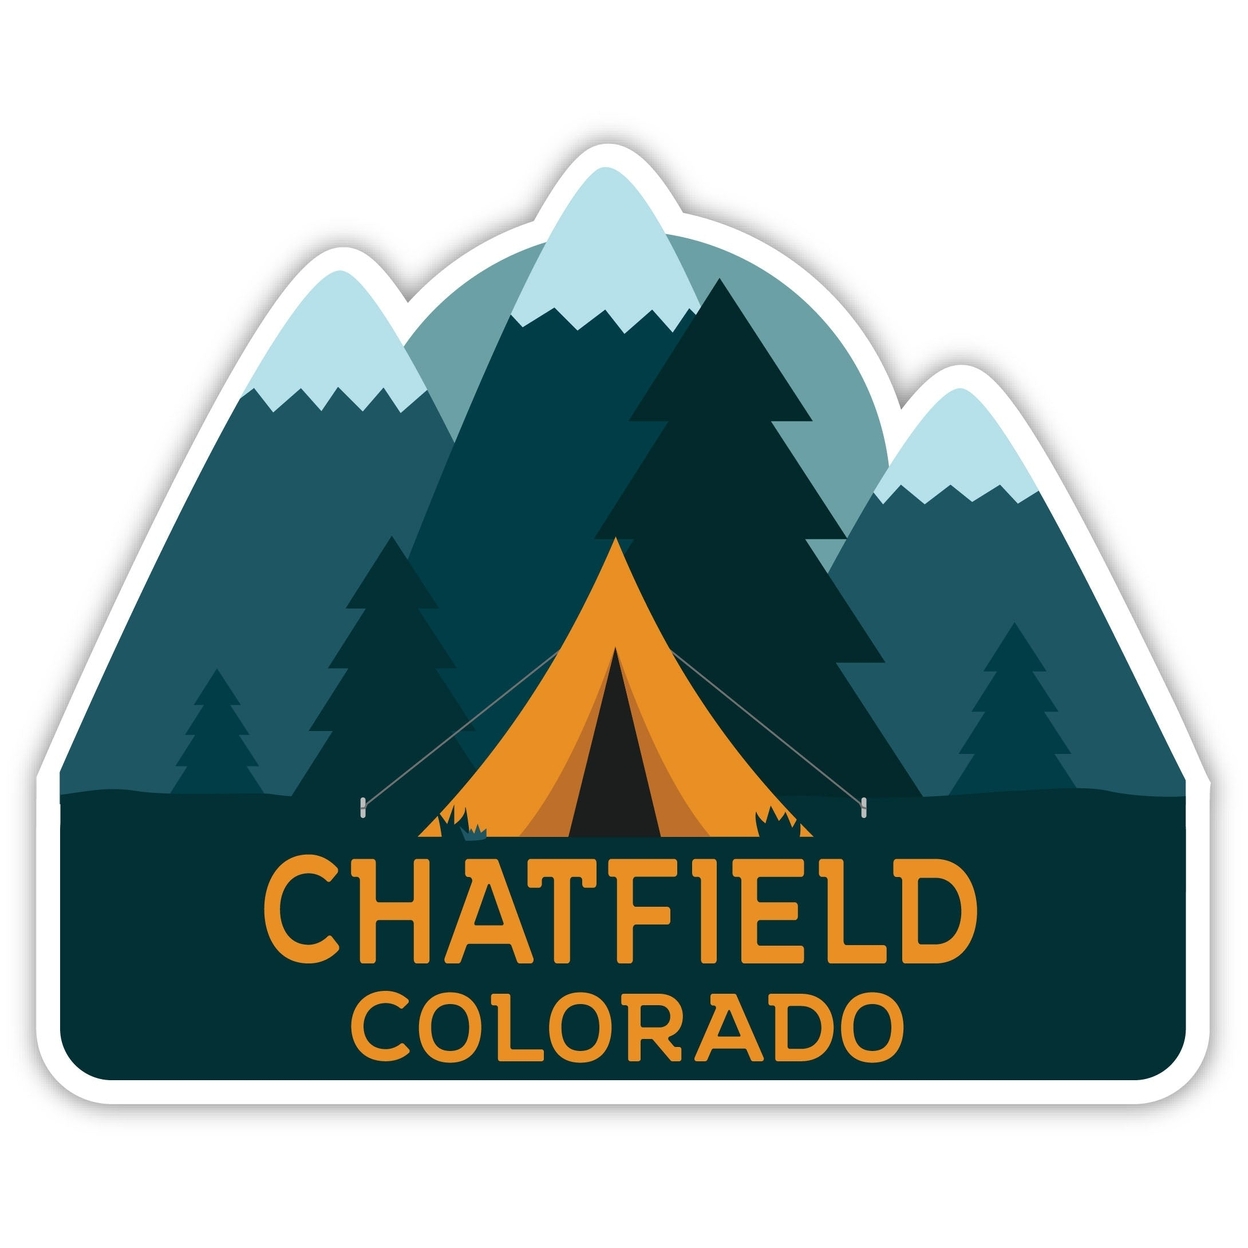 Chatfield Colorado Souvenir Decorative Stickers (Choose Theme And Size) - 4-Pack, 4-Inch, Tent